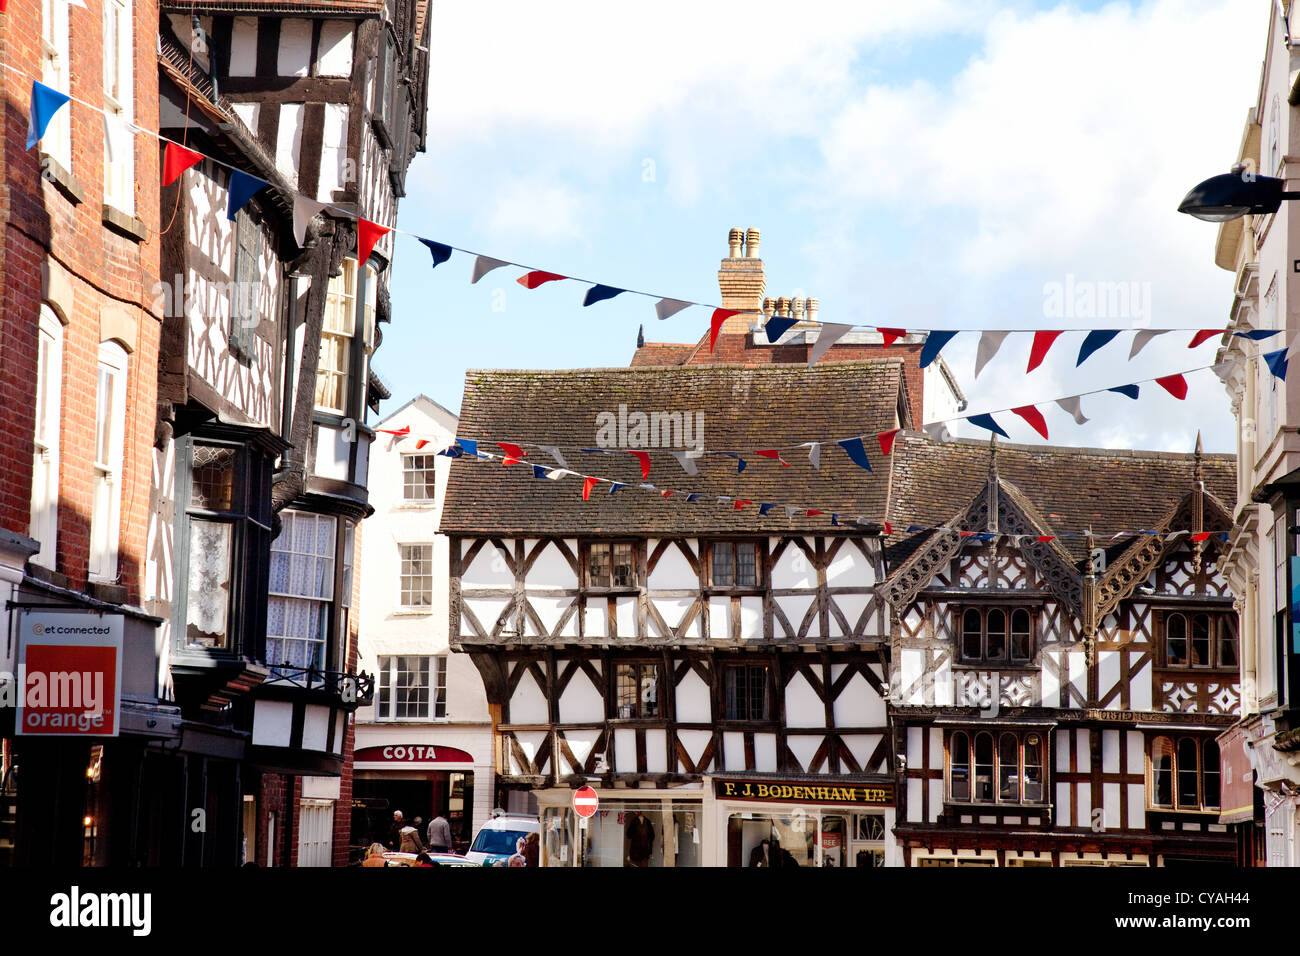 UK medieval town; Medieval 16th century half timbered buildings and bunting, Ludlow town centre, Shropshire England UK Stock Photo